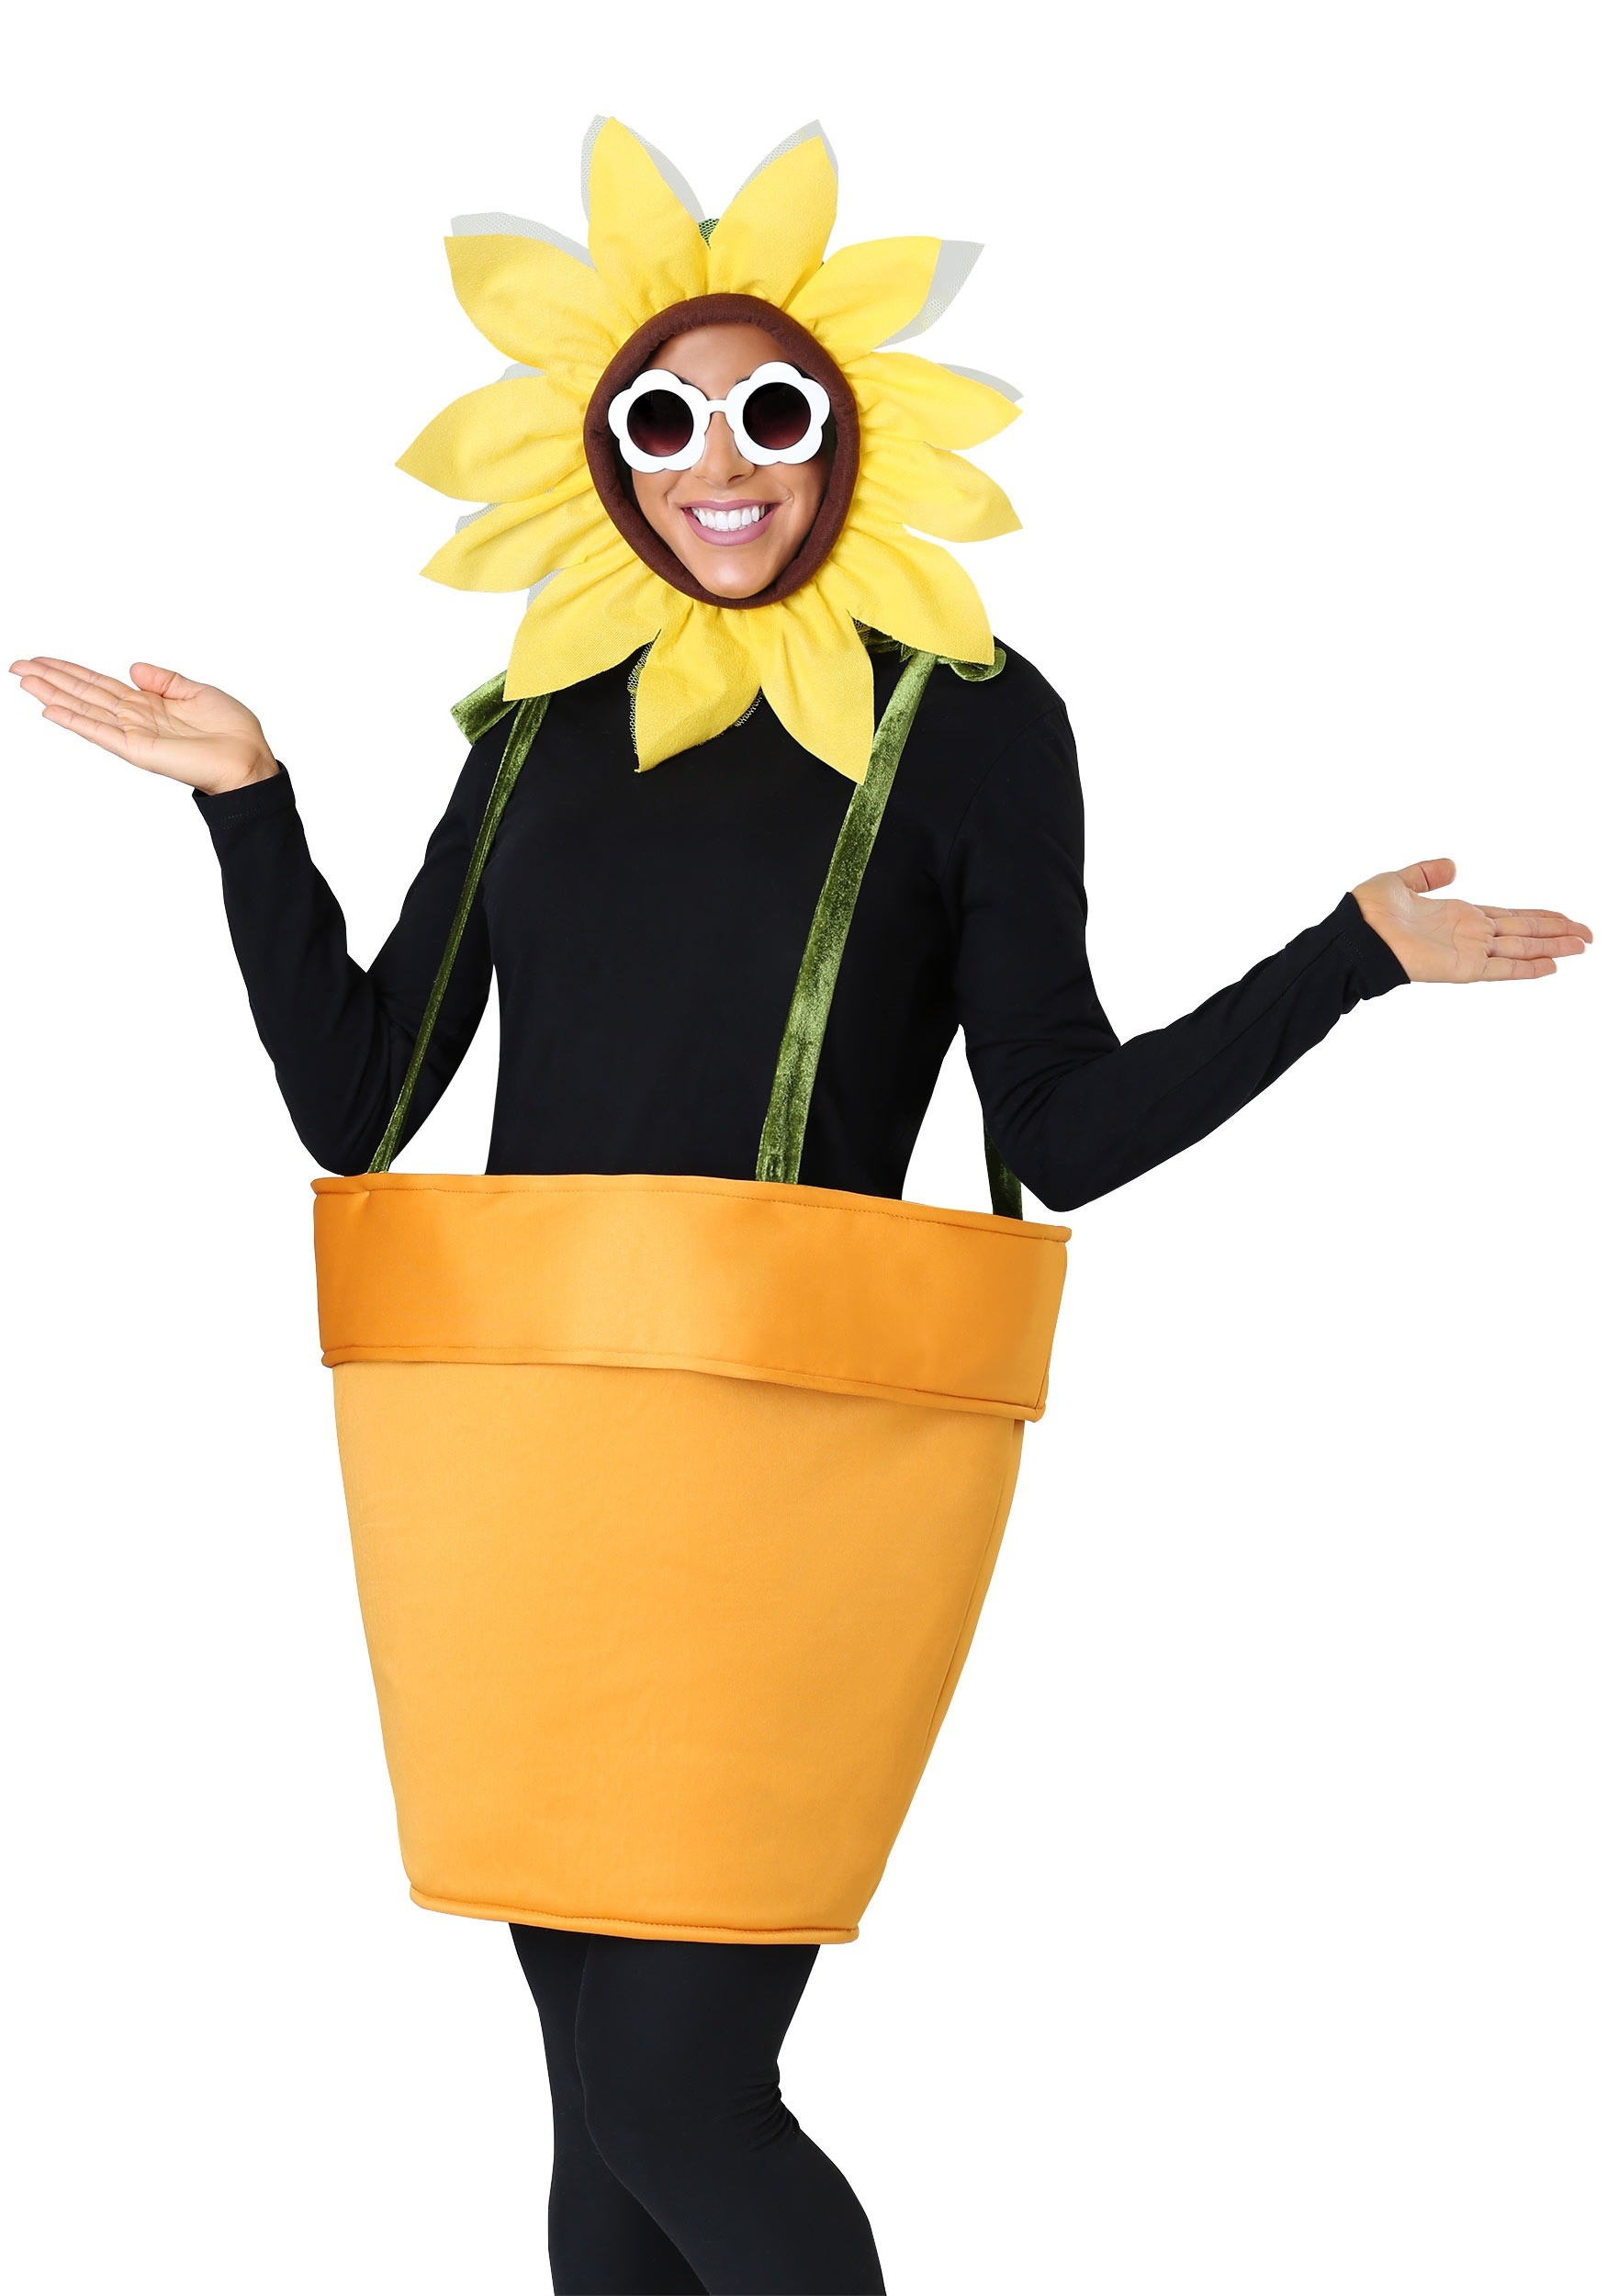 Flower Halloween Costume For Adults
 Flower Pot Costume for Adults